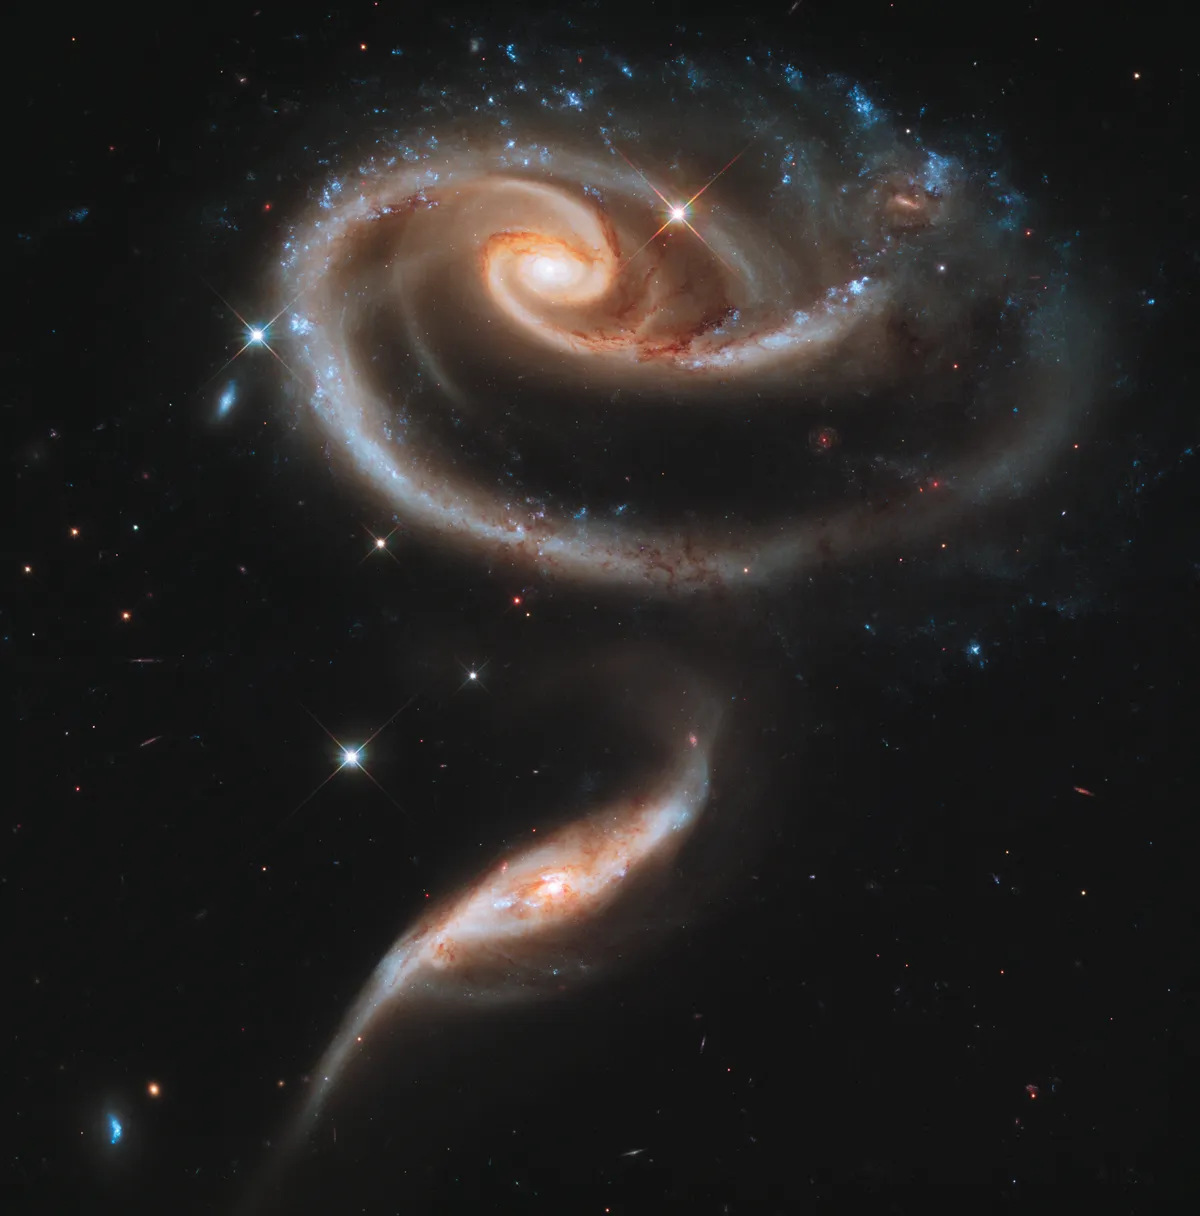 Arp 273 20 April 2011. A pair of interacting galaxies called Arp 273 form the shape of a rose. It's thought the smaller galaxy has passed through the larger one. Credit: NASA, ESA and the Hubble Heritage Team (STScI/AURA)